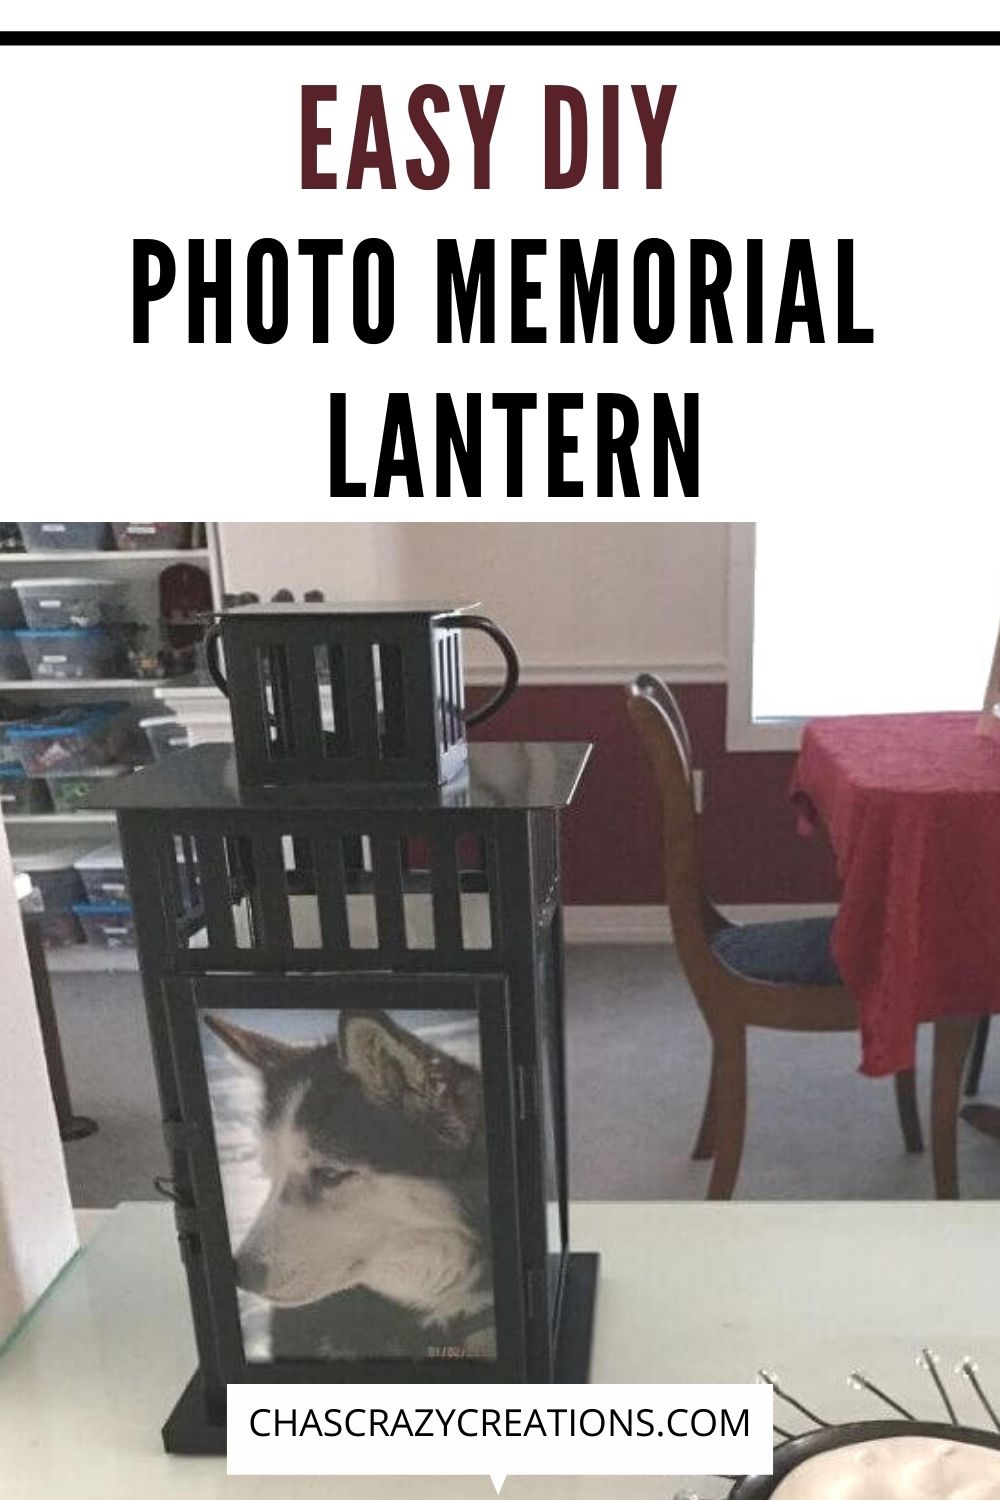 Do you want to make DIY photo memorial lanterns? I'll show you how with this simple tutorial!